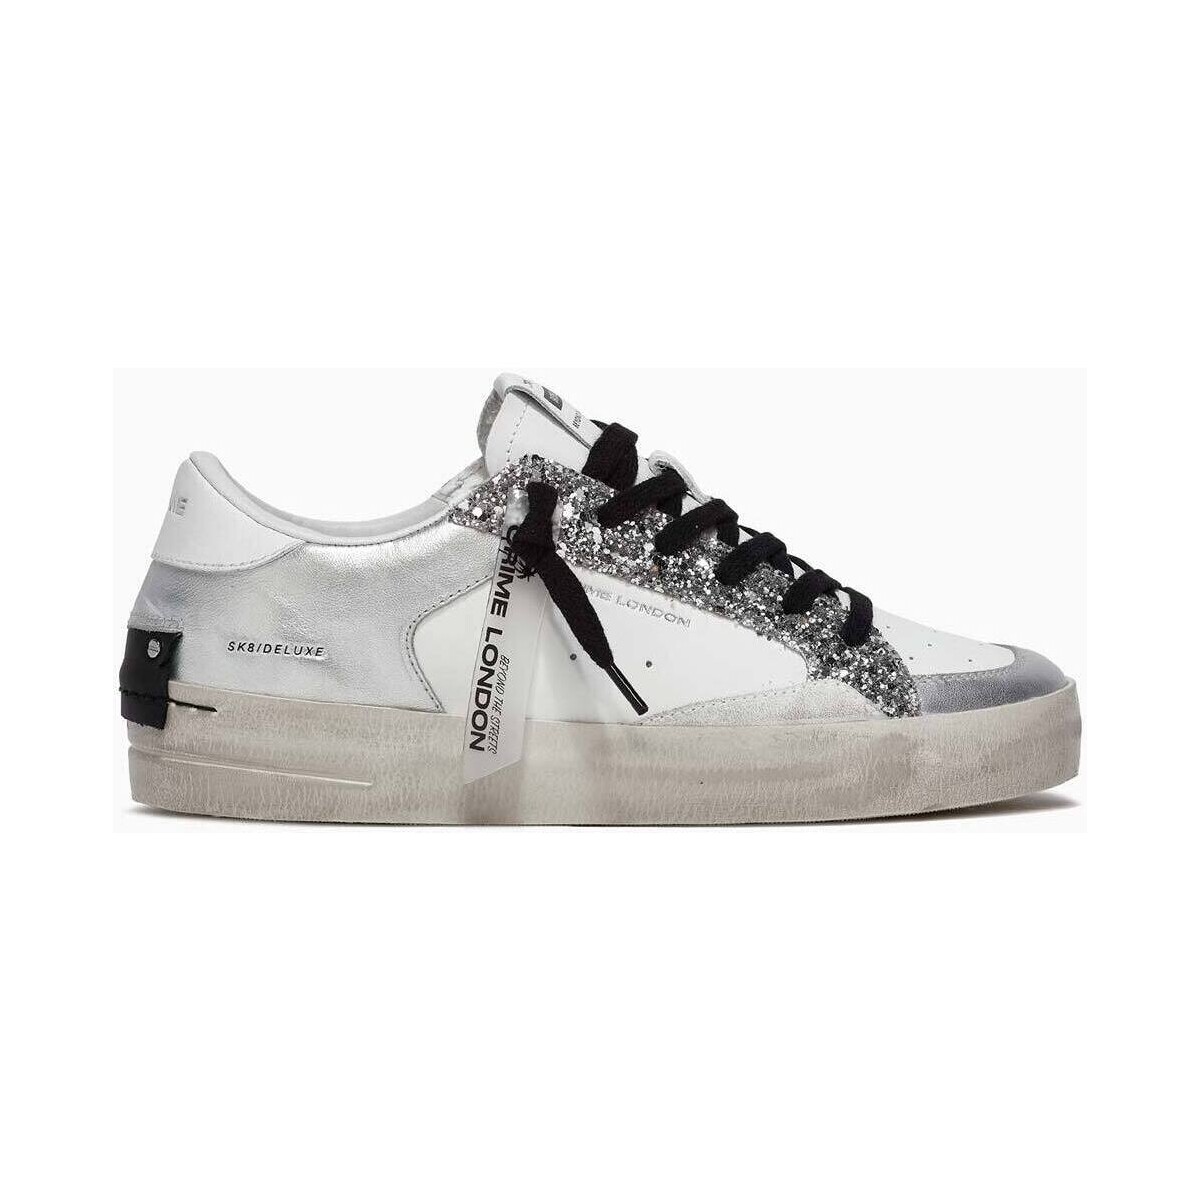 Chaussures Femme Baskets basses Crime London SK8 Deluxe Silver Glm CRIE LONDON Blanc